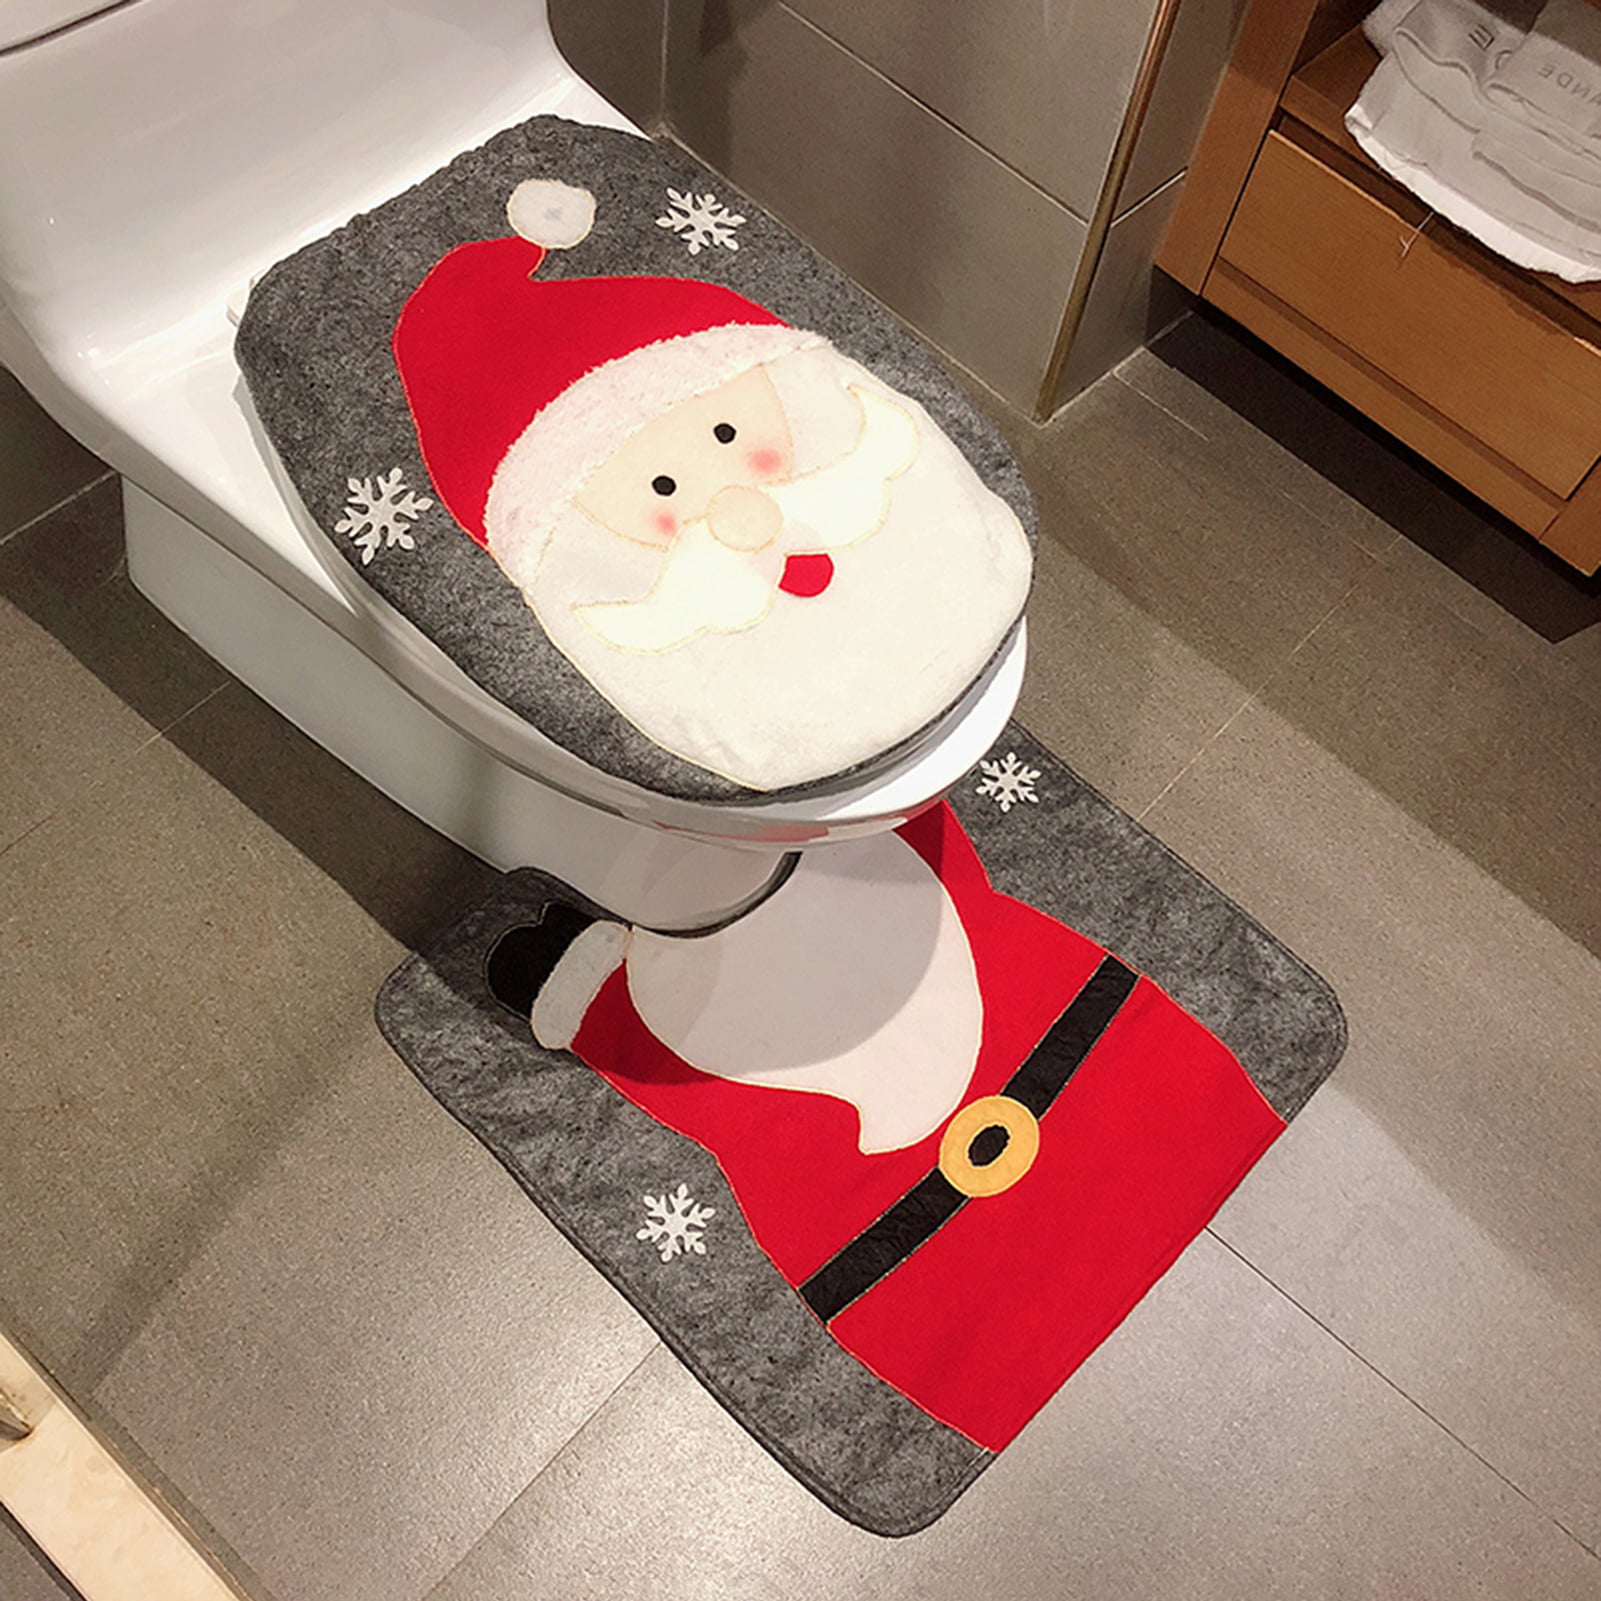 Christmas Snowman Toilet Seat Cover Mat Rug Xmas Party Novelty Home Accessories 